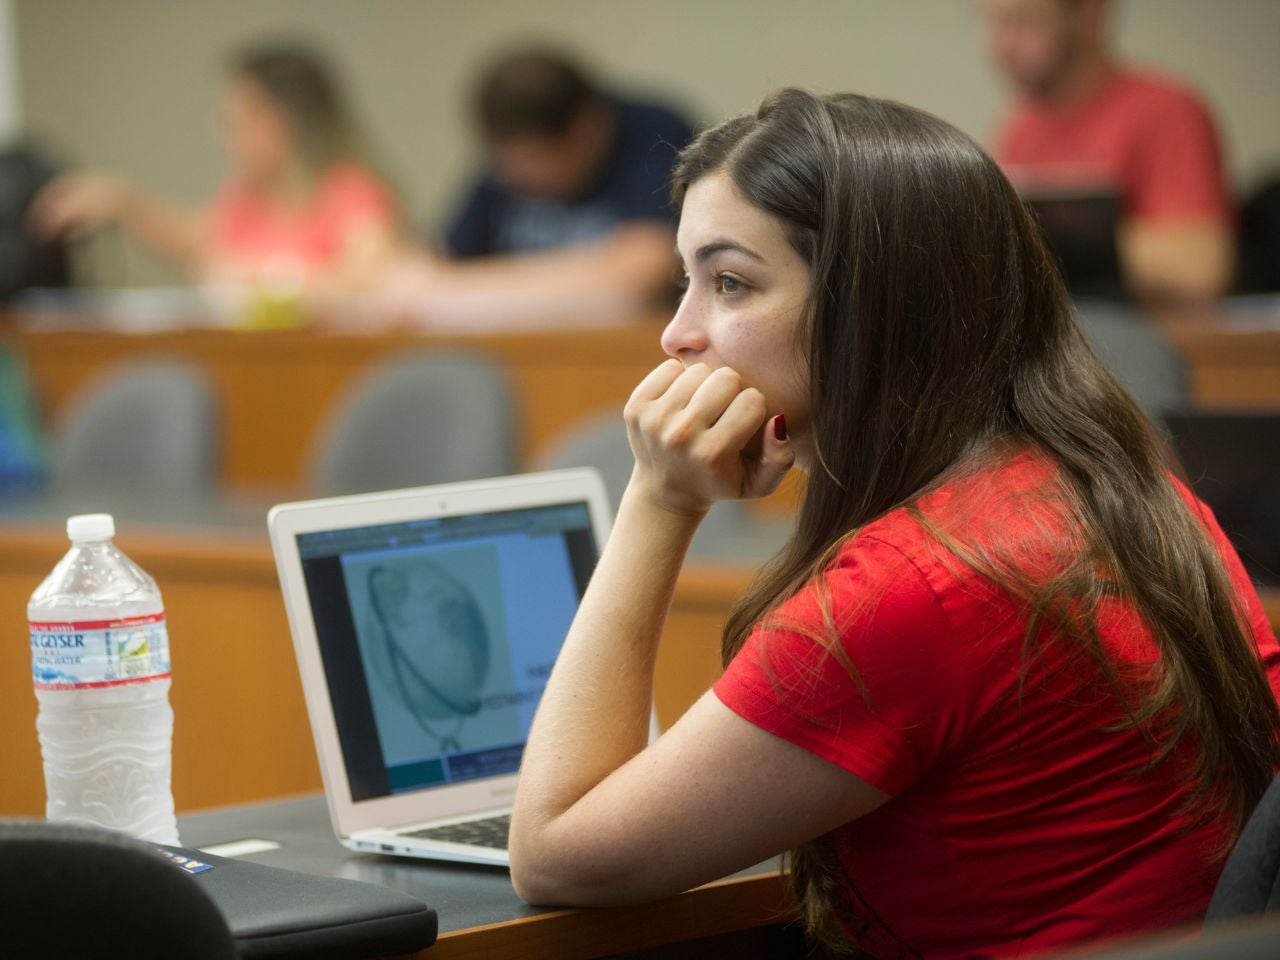 A student sitting in class at King Hall stares off in thought with her chin propped on her hand, laptop open in front of her.